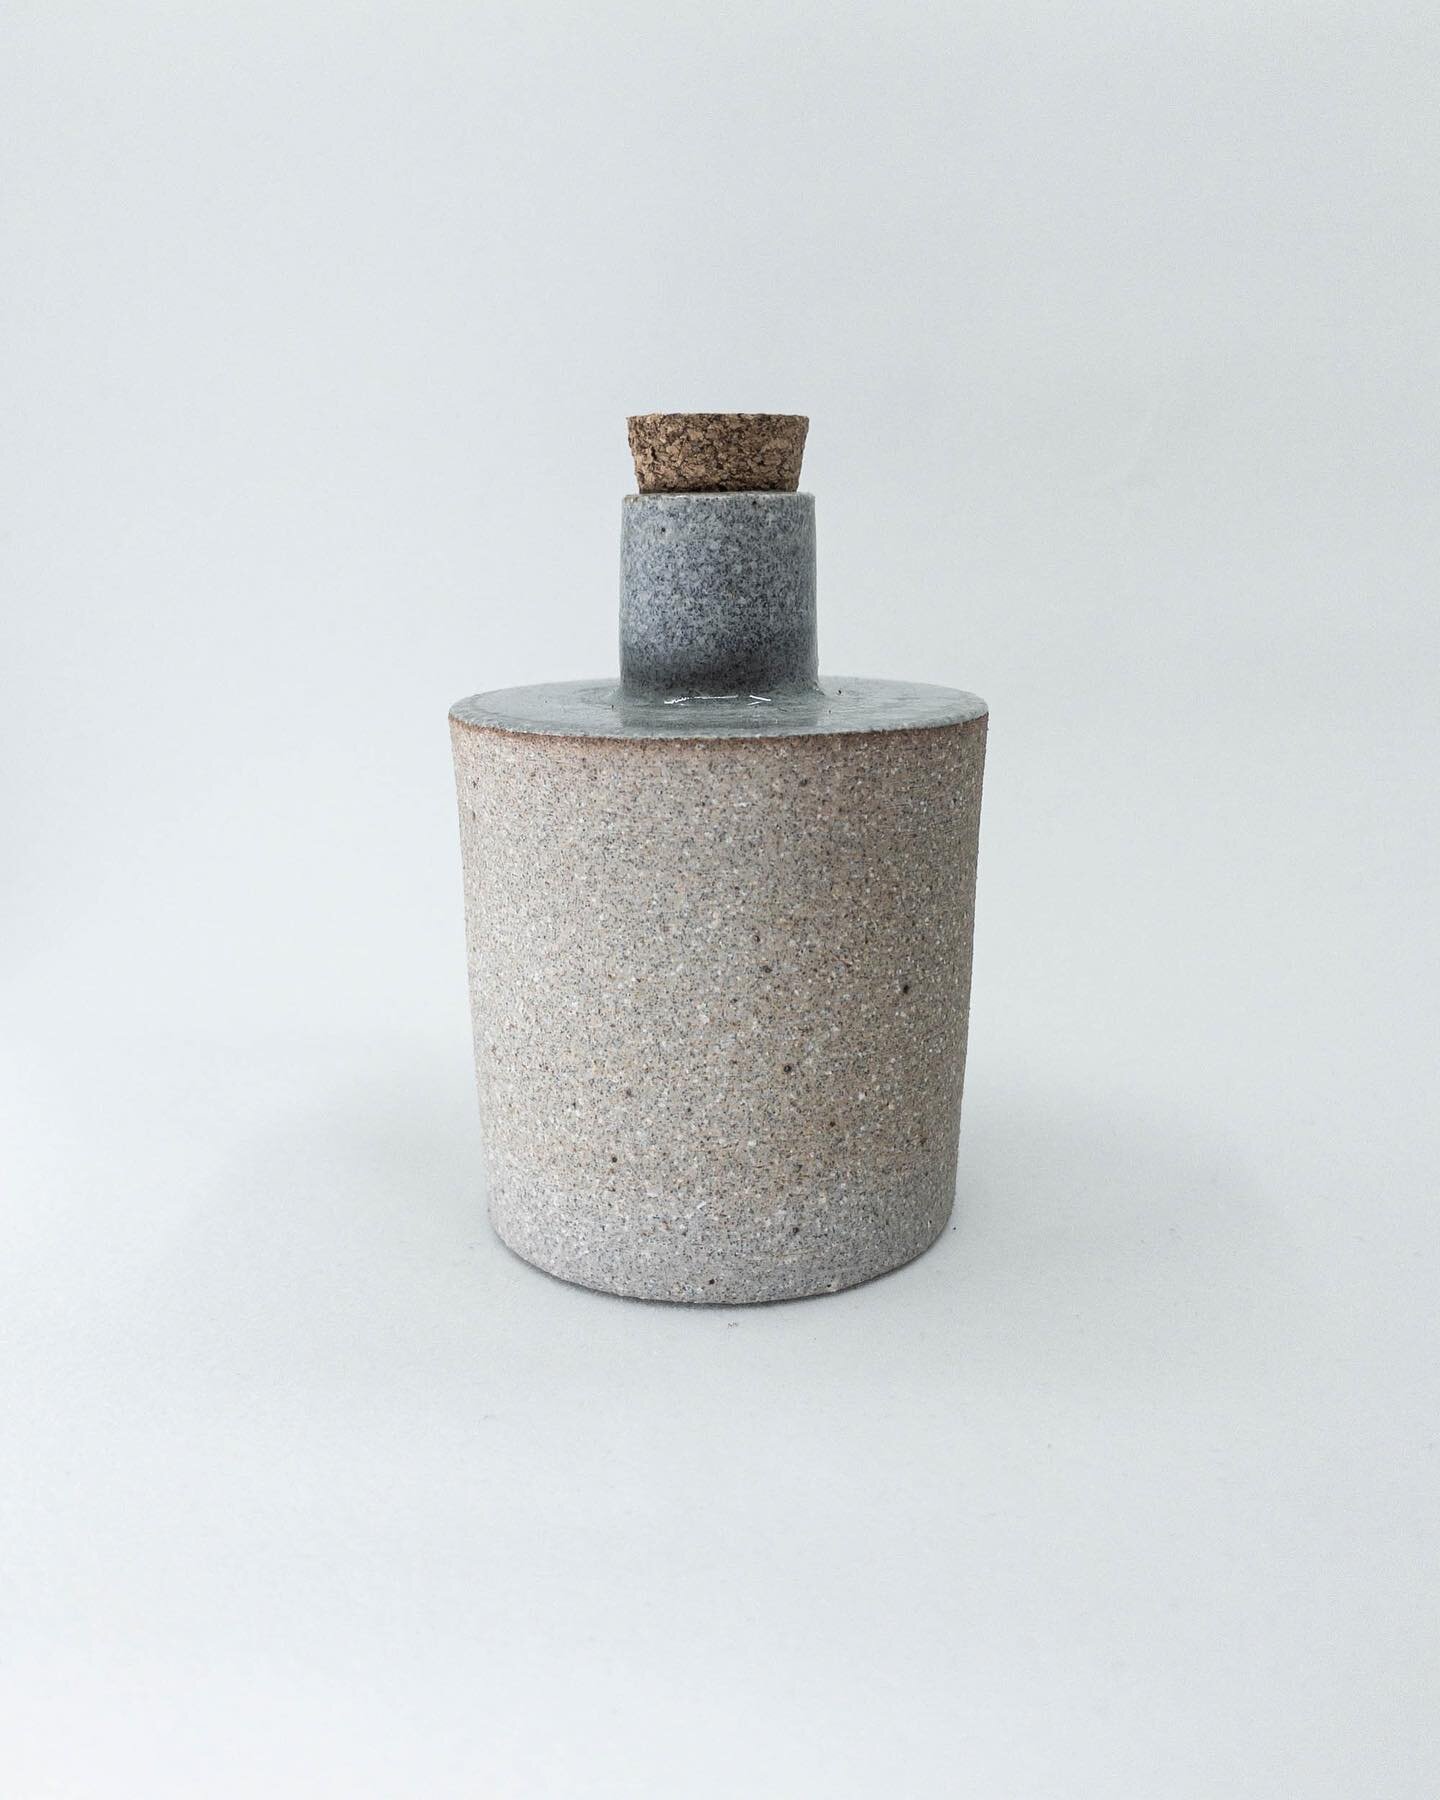 Potion bottles. Made from &ldquo;granite&rdquo; stoneware with a clear glaze, reduction fired to cone 10. Brother and sister pieces for a brother and a sister. More of that good polished concrete combo. 
.
.
.
.
.
#pottery #ceramics #handmade #bottle